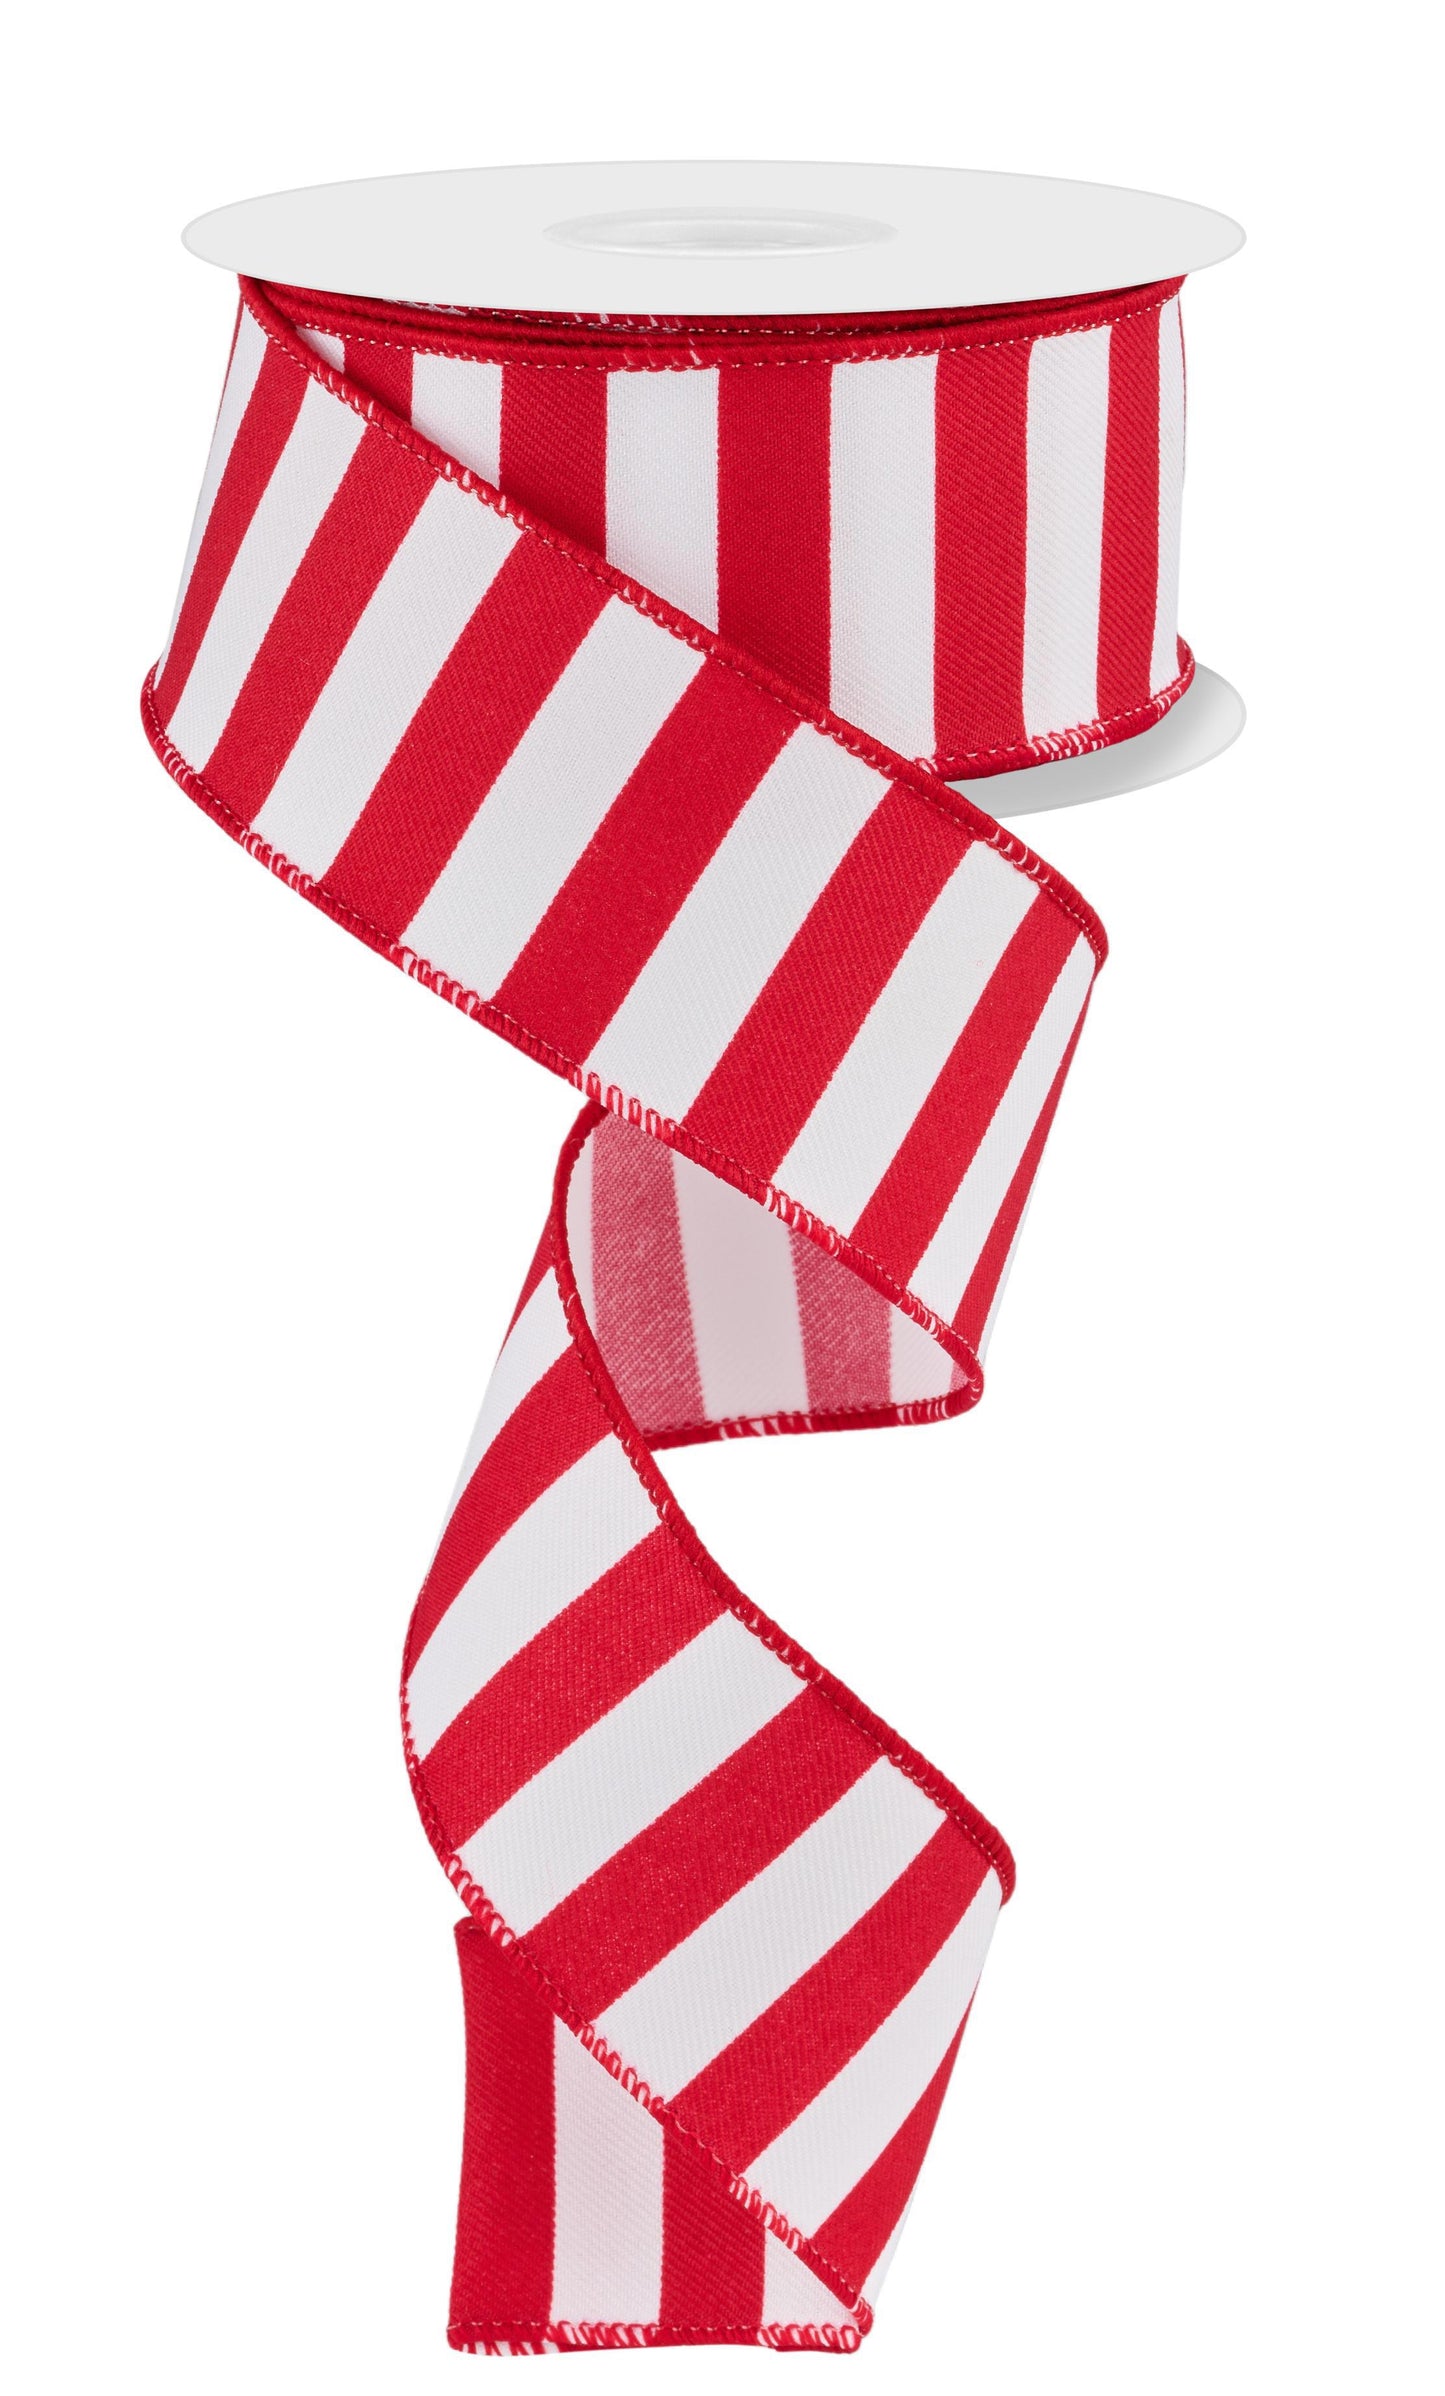 Wired Ribbon * Medium Horizontal Stripe * Red and White Canvas * 1.5" x 10 Yards * RGE178467